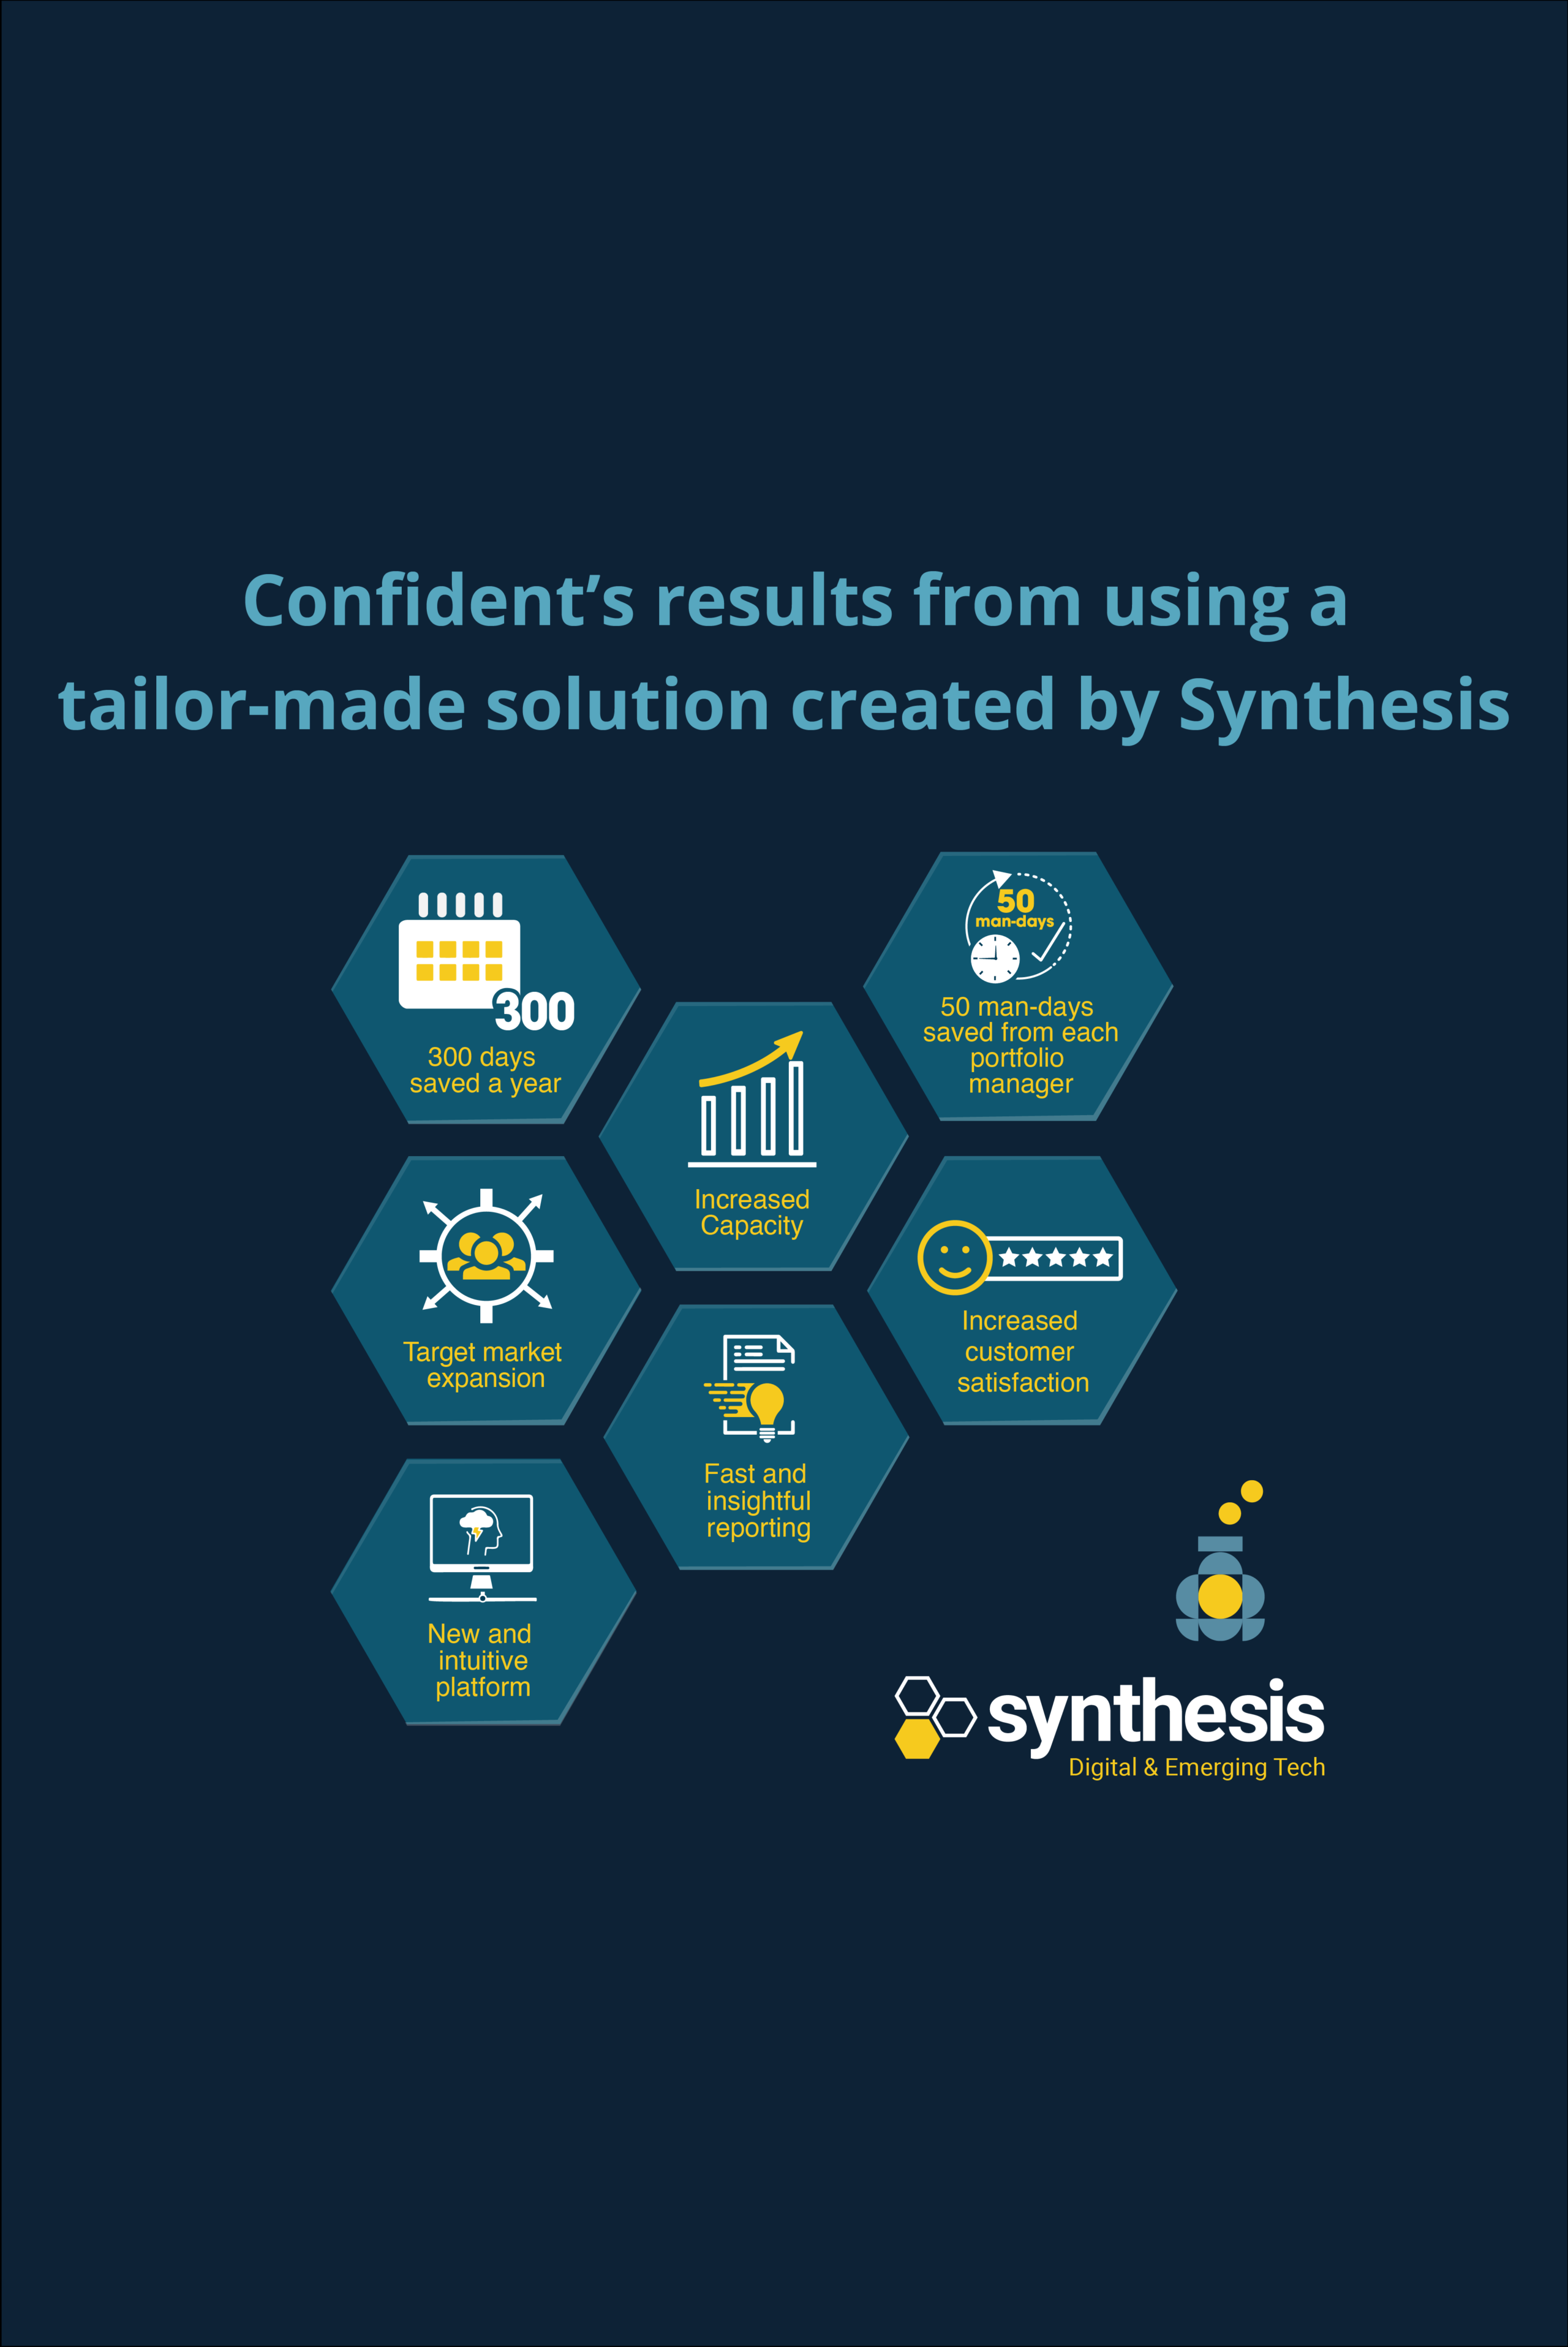 CONFIDENT AND SYNTHESIS ENHANCE CUSTOMER EXPERIENCE